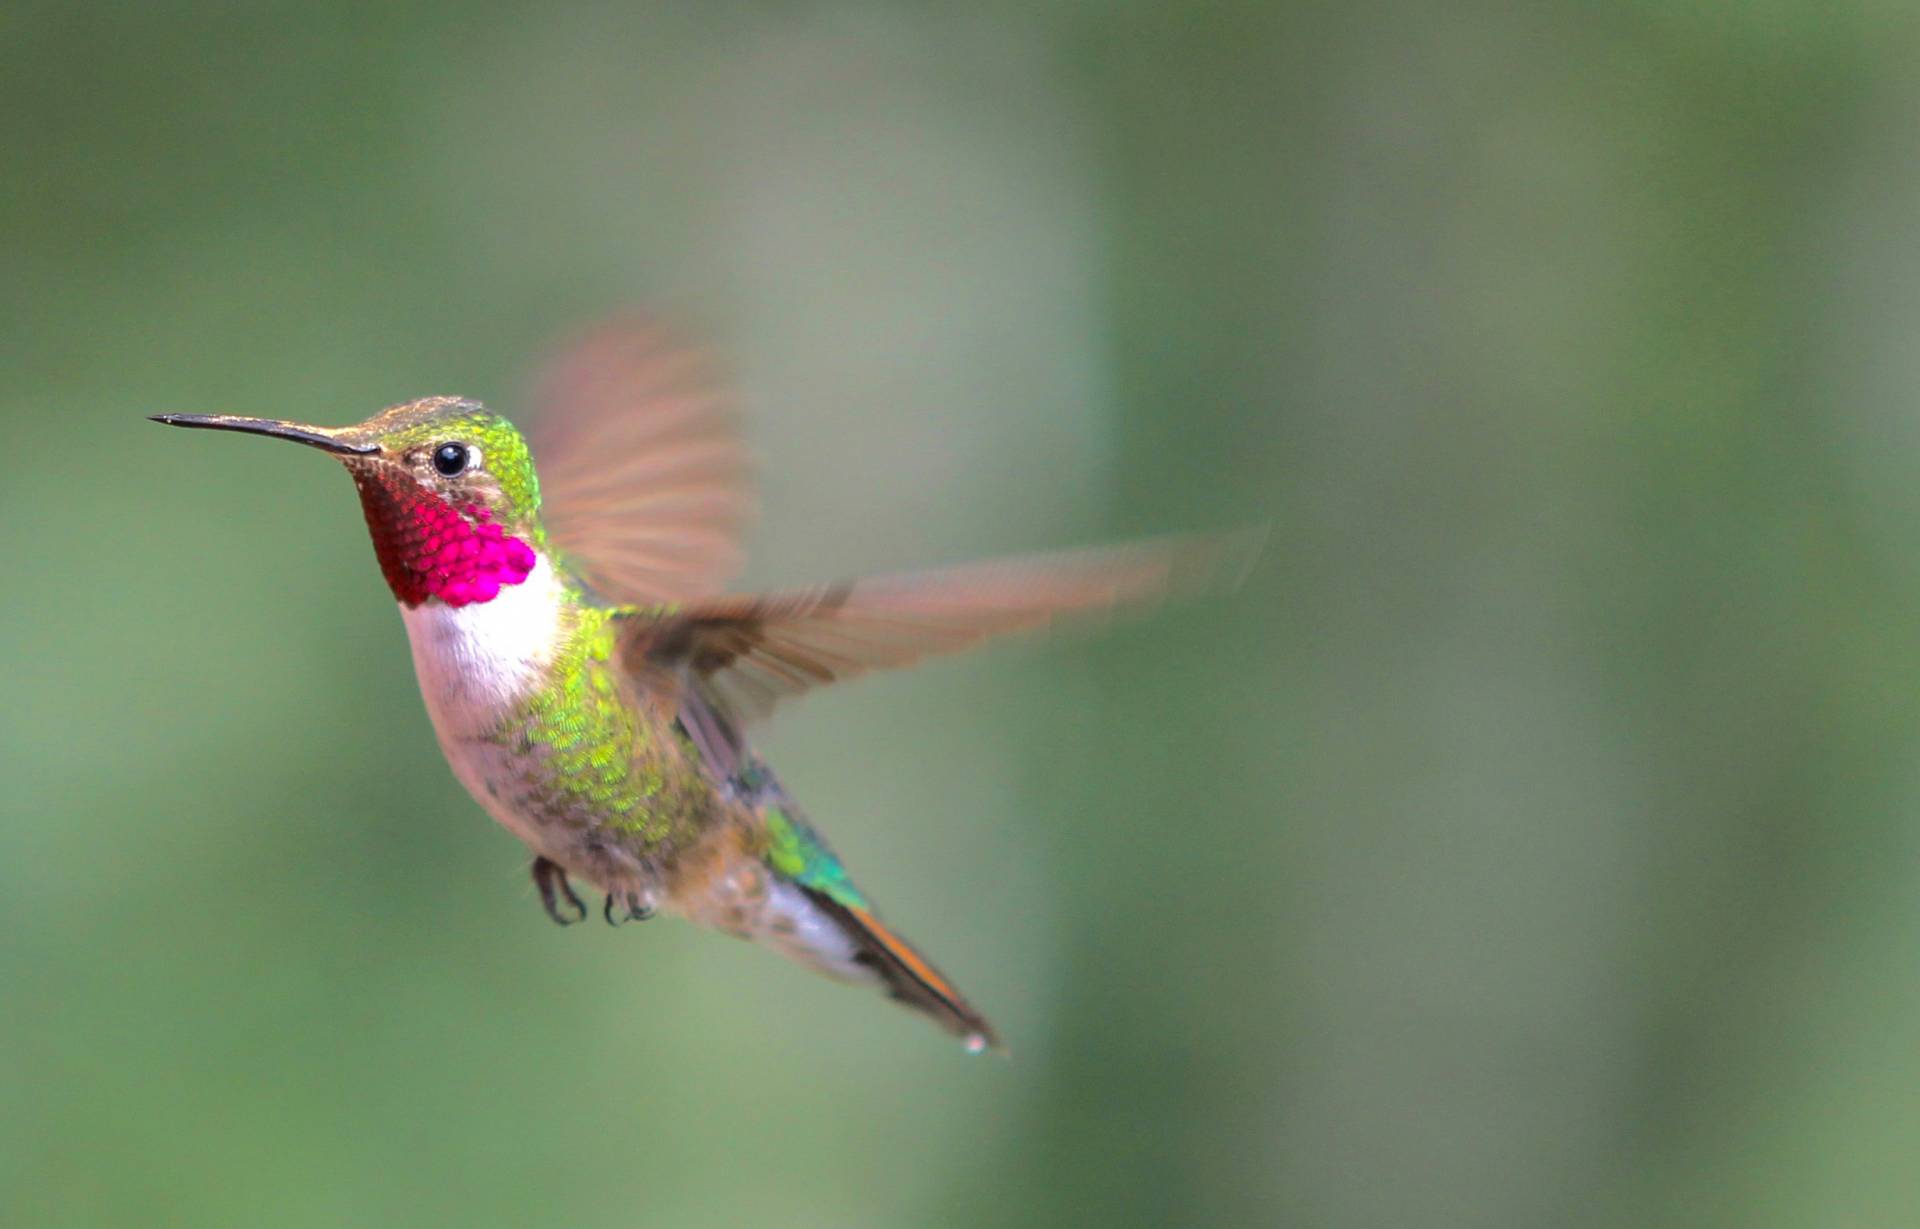 unhelpful thinking can appear when things change, such as the hummingbirds migrating